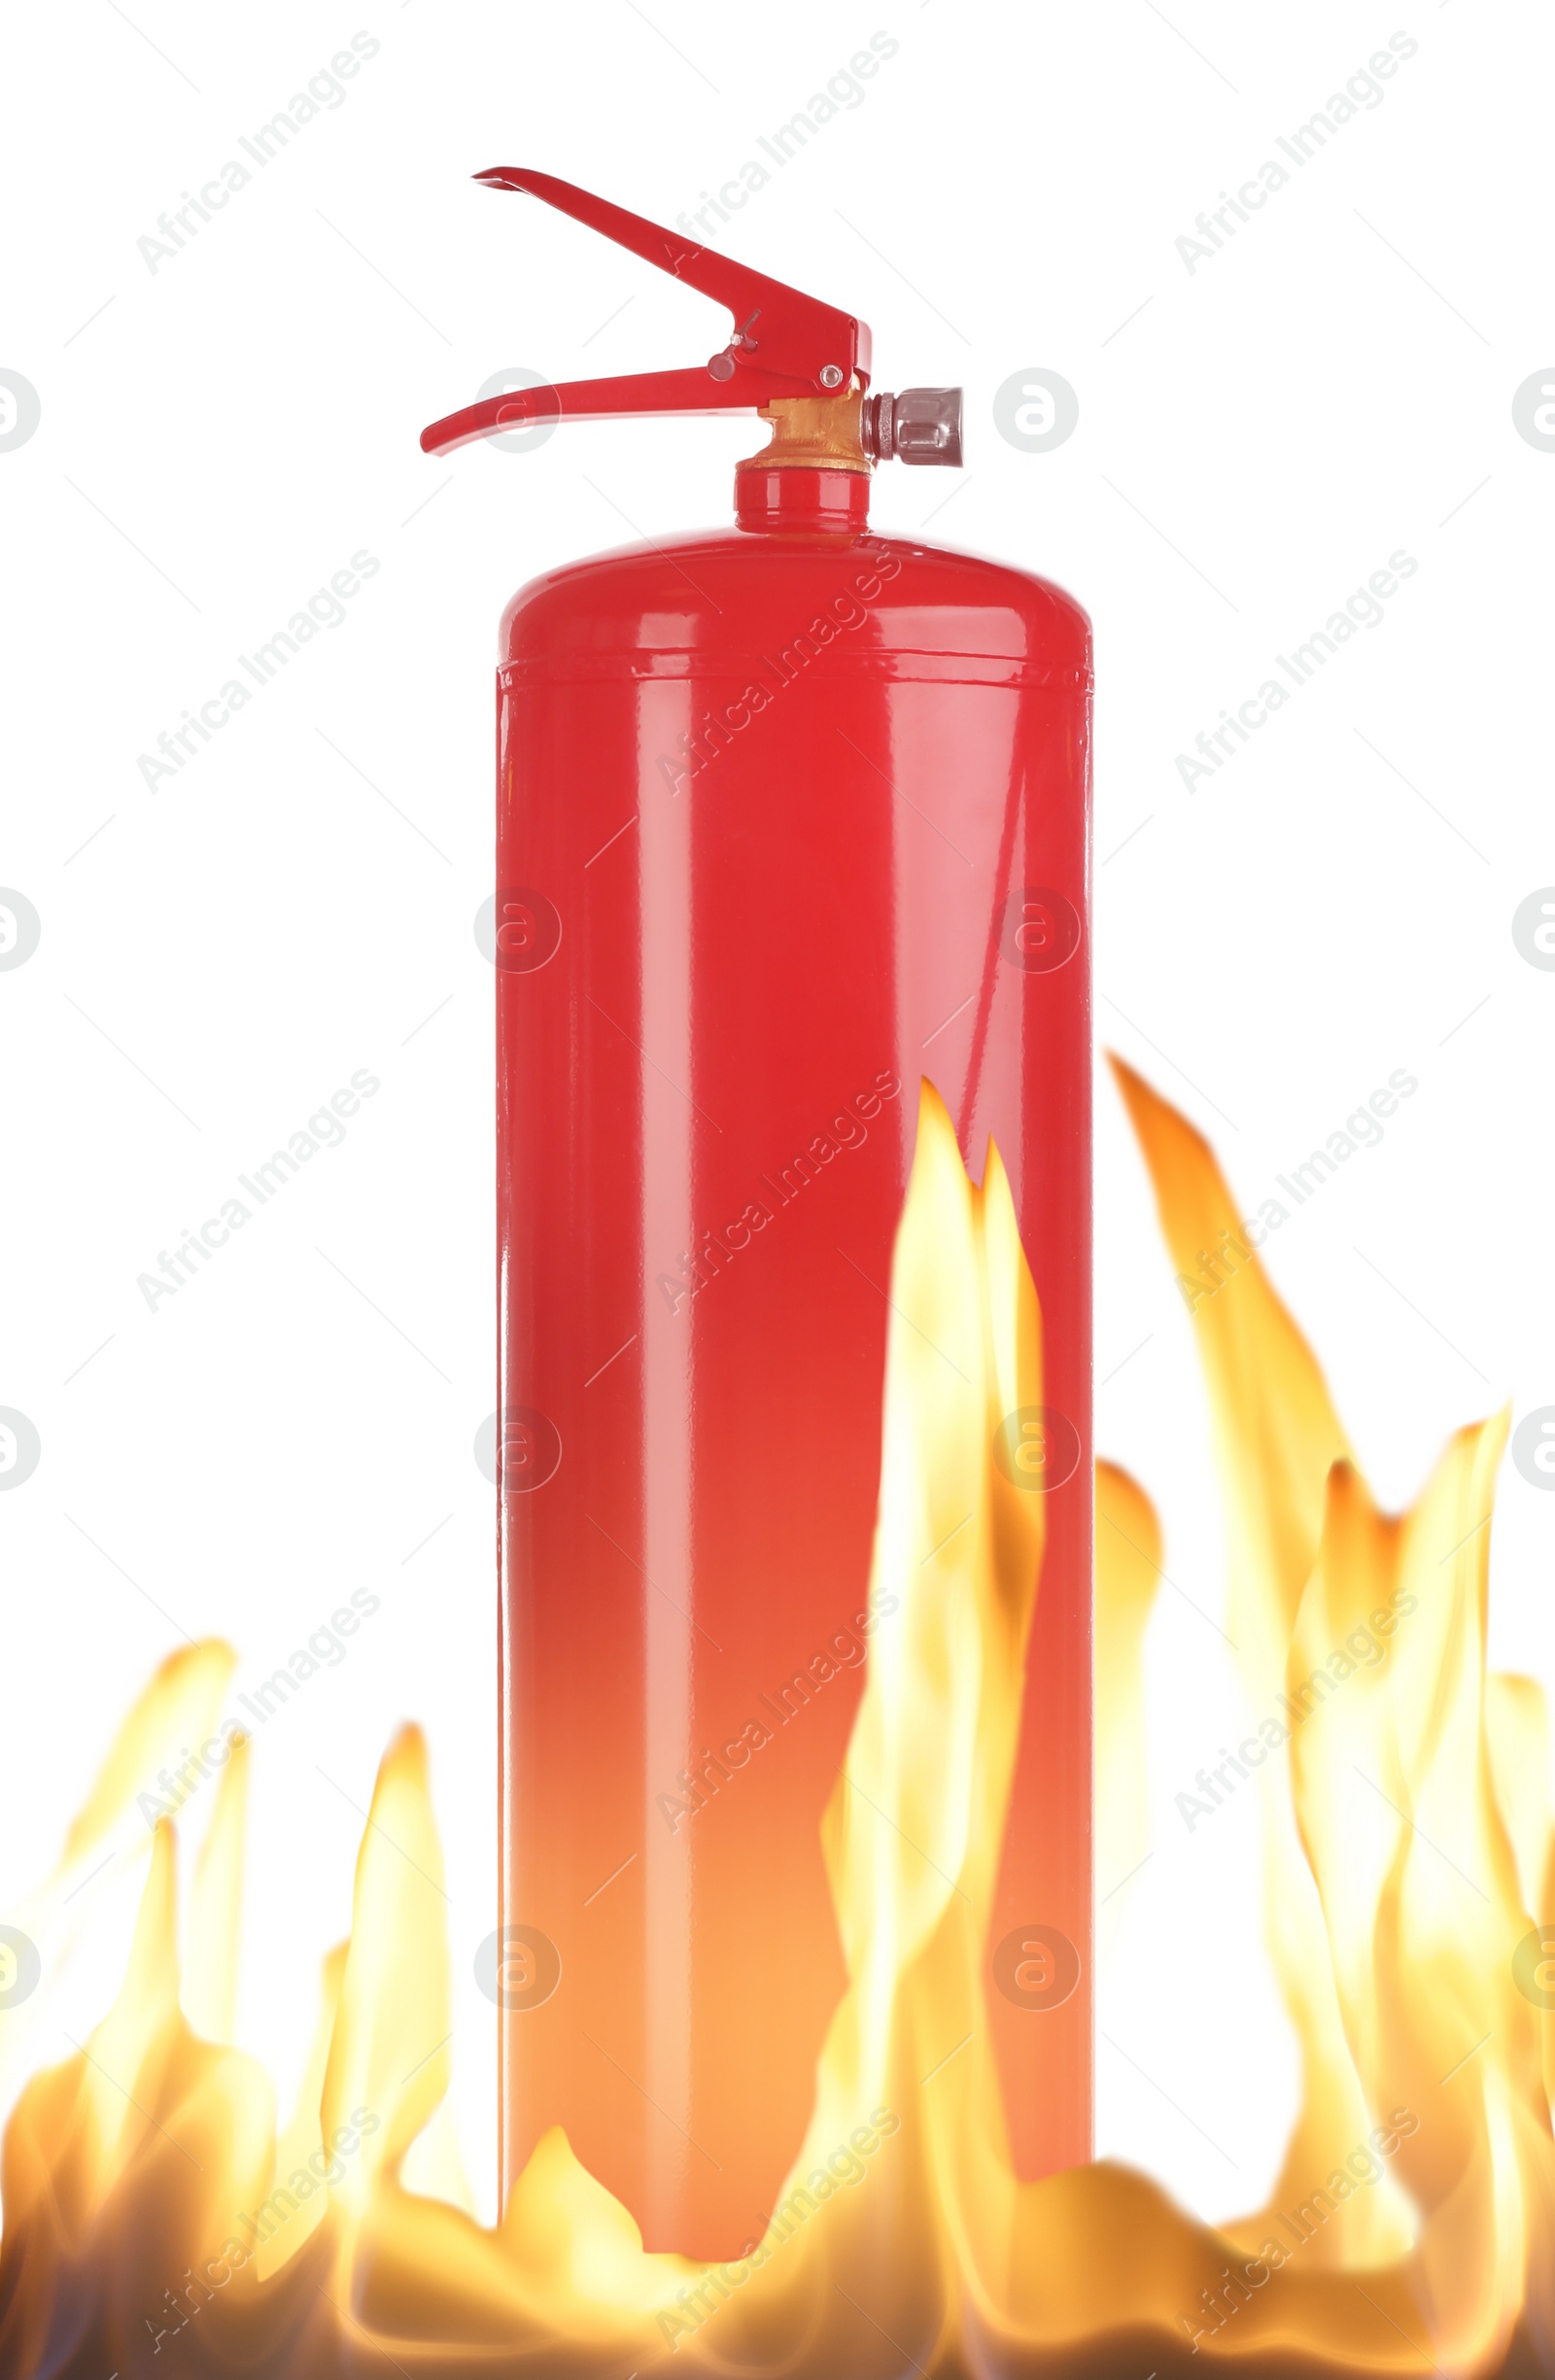 Image of Fire extinguisher surrounded by flame on white background